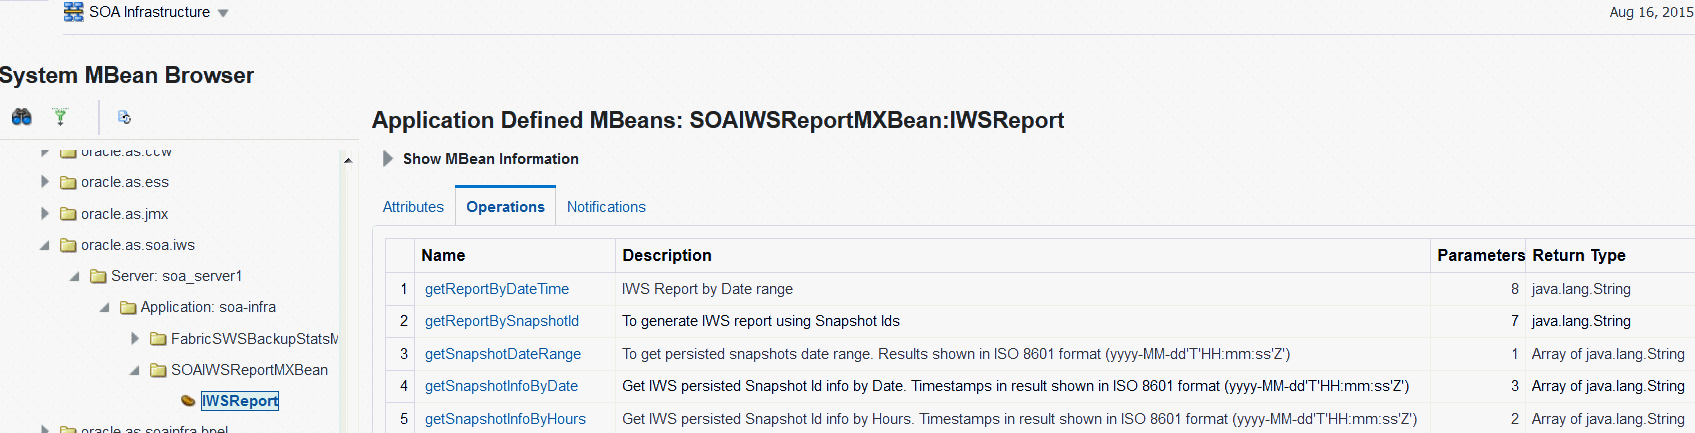 System MBean Browser showing IWSReport Operations tab.